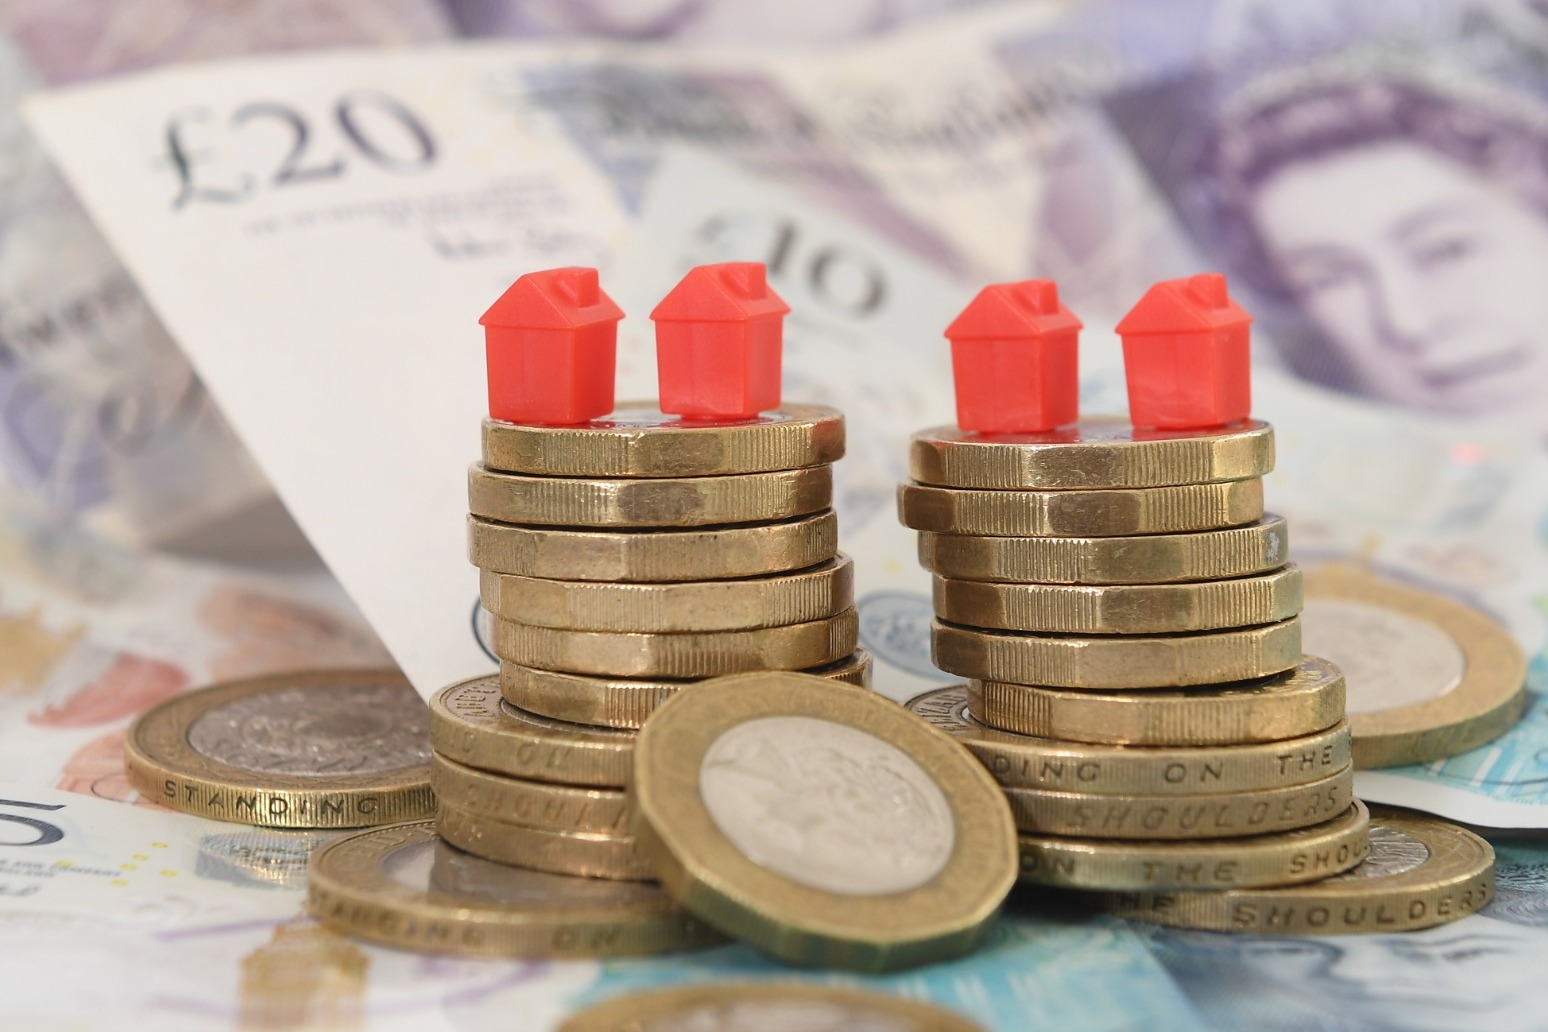 Home-owning still cheaper than renting overall but difference reduced – study 